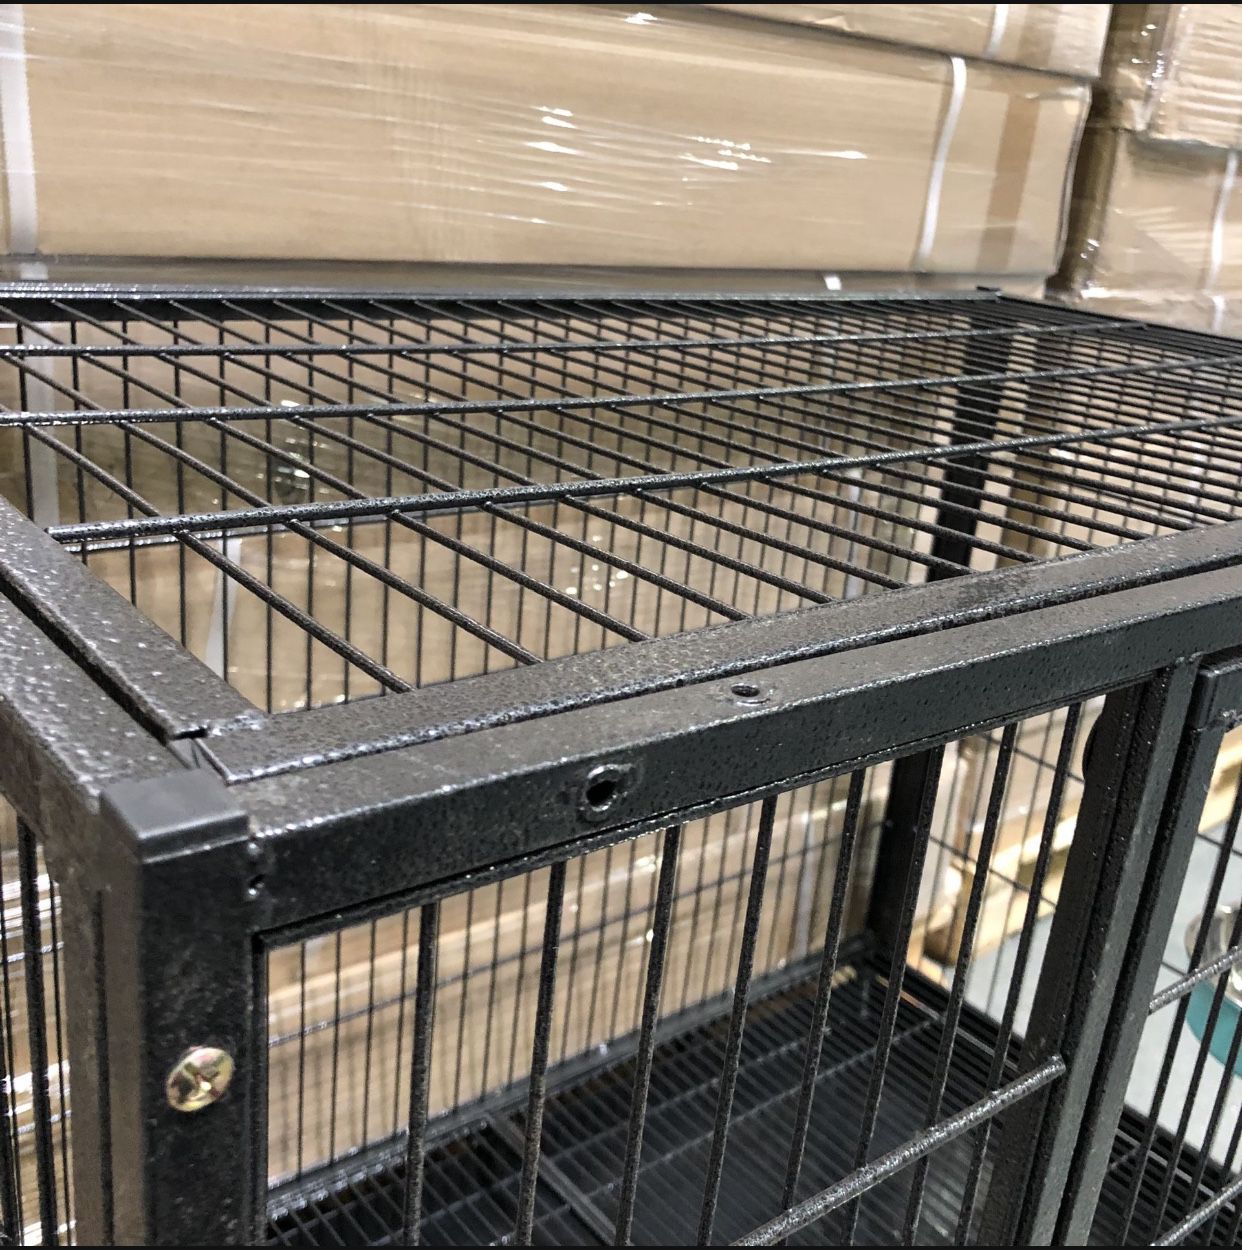 🔴 On sale 🔥Double Set Brandnew 37” Heavy Duty Dog Kennel Crate Cage 🐶 please see dimensions in second picture 🇺🇸 